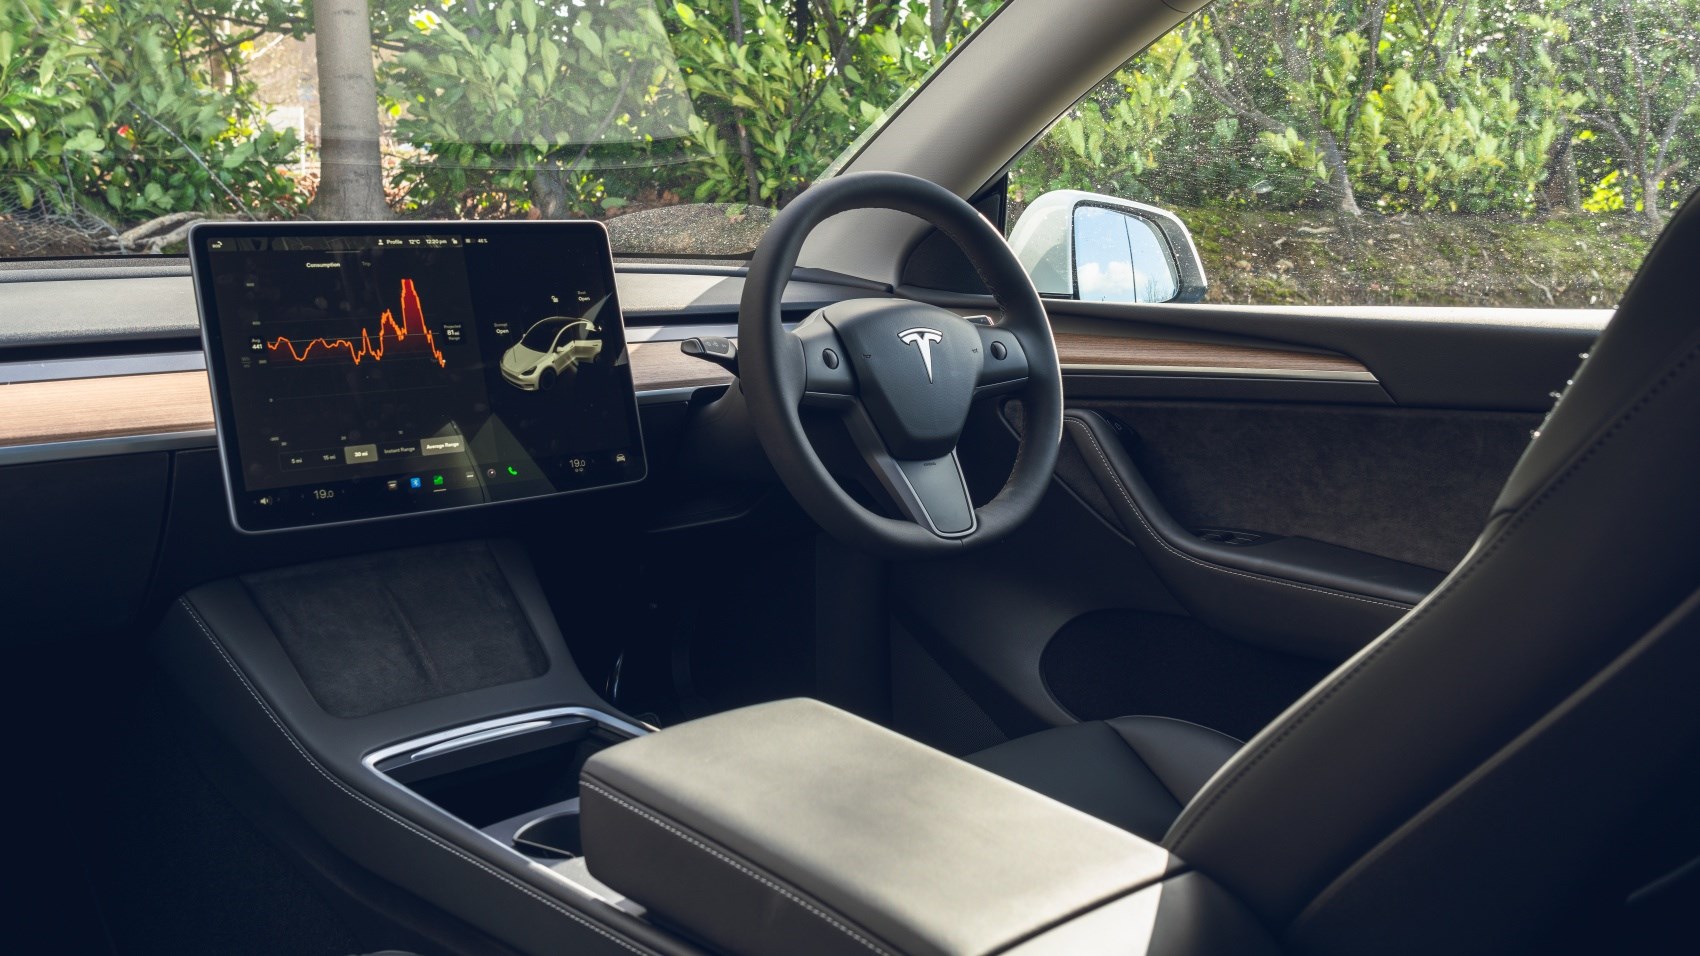 This is how you can protect your Tesla Model Y interior – Tesla